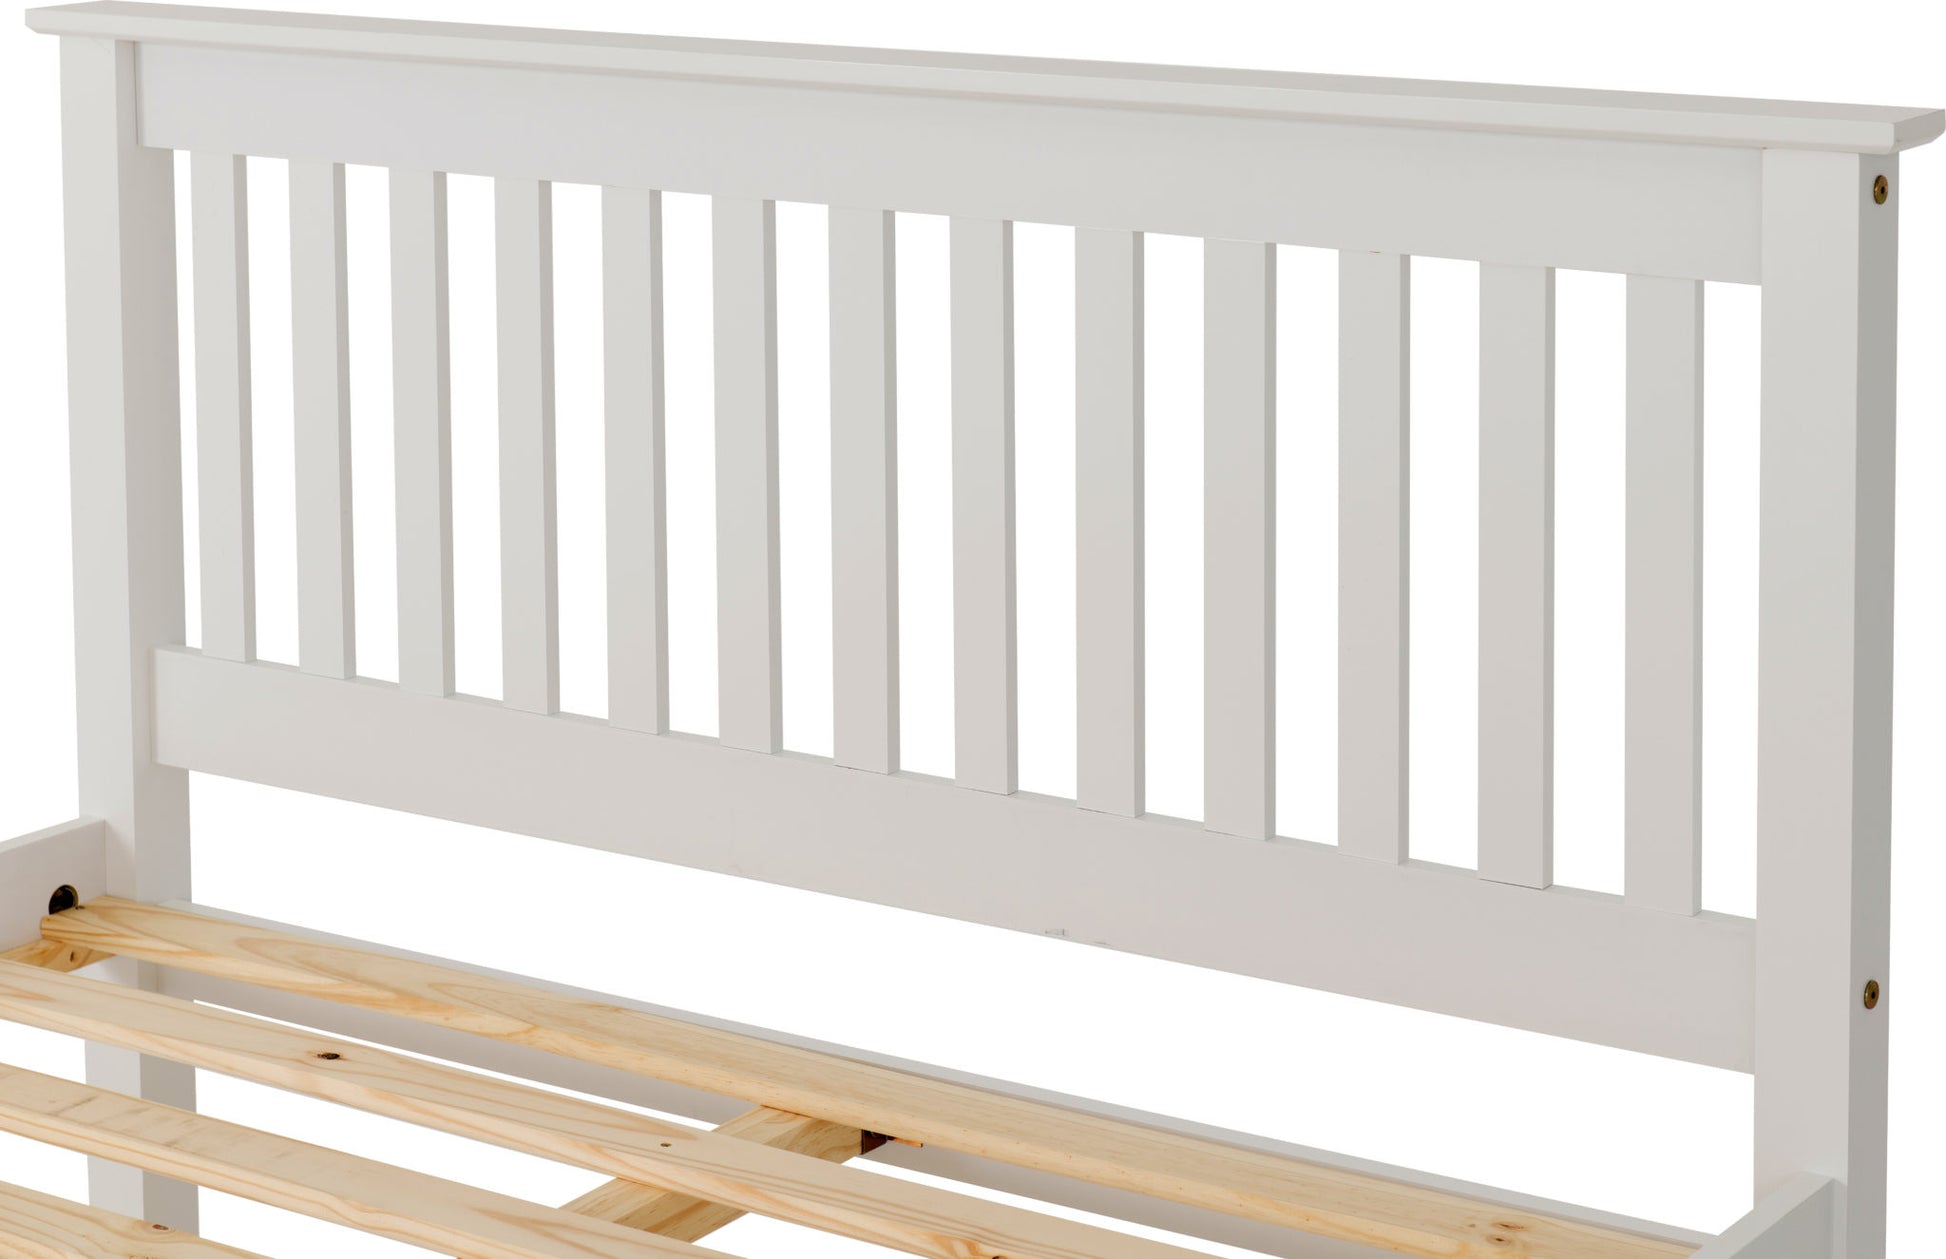 Monaco 5' Bed Low Foot End - White